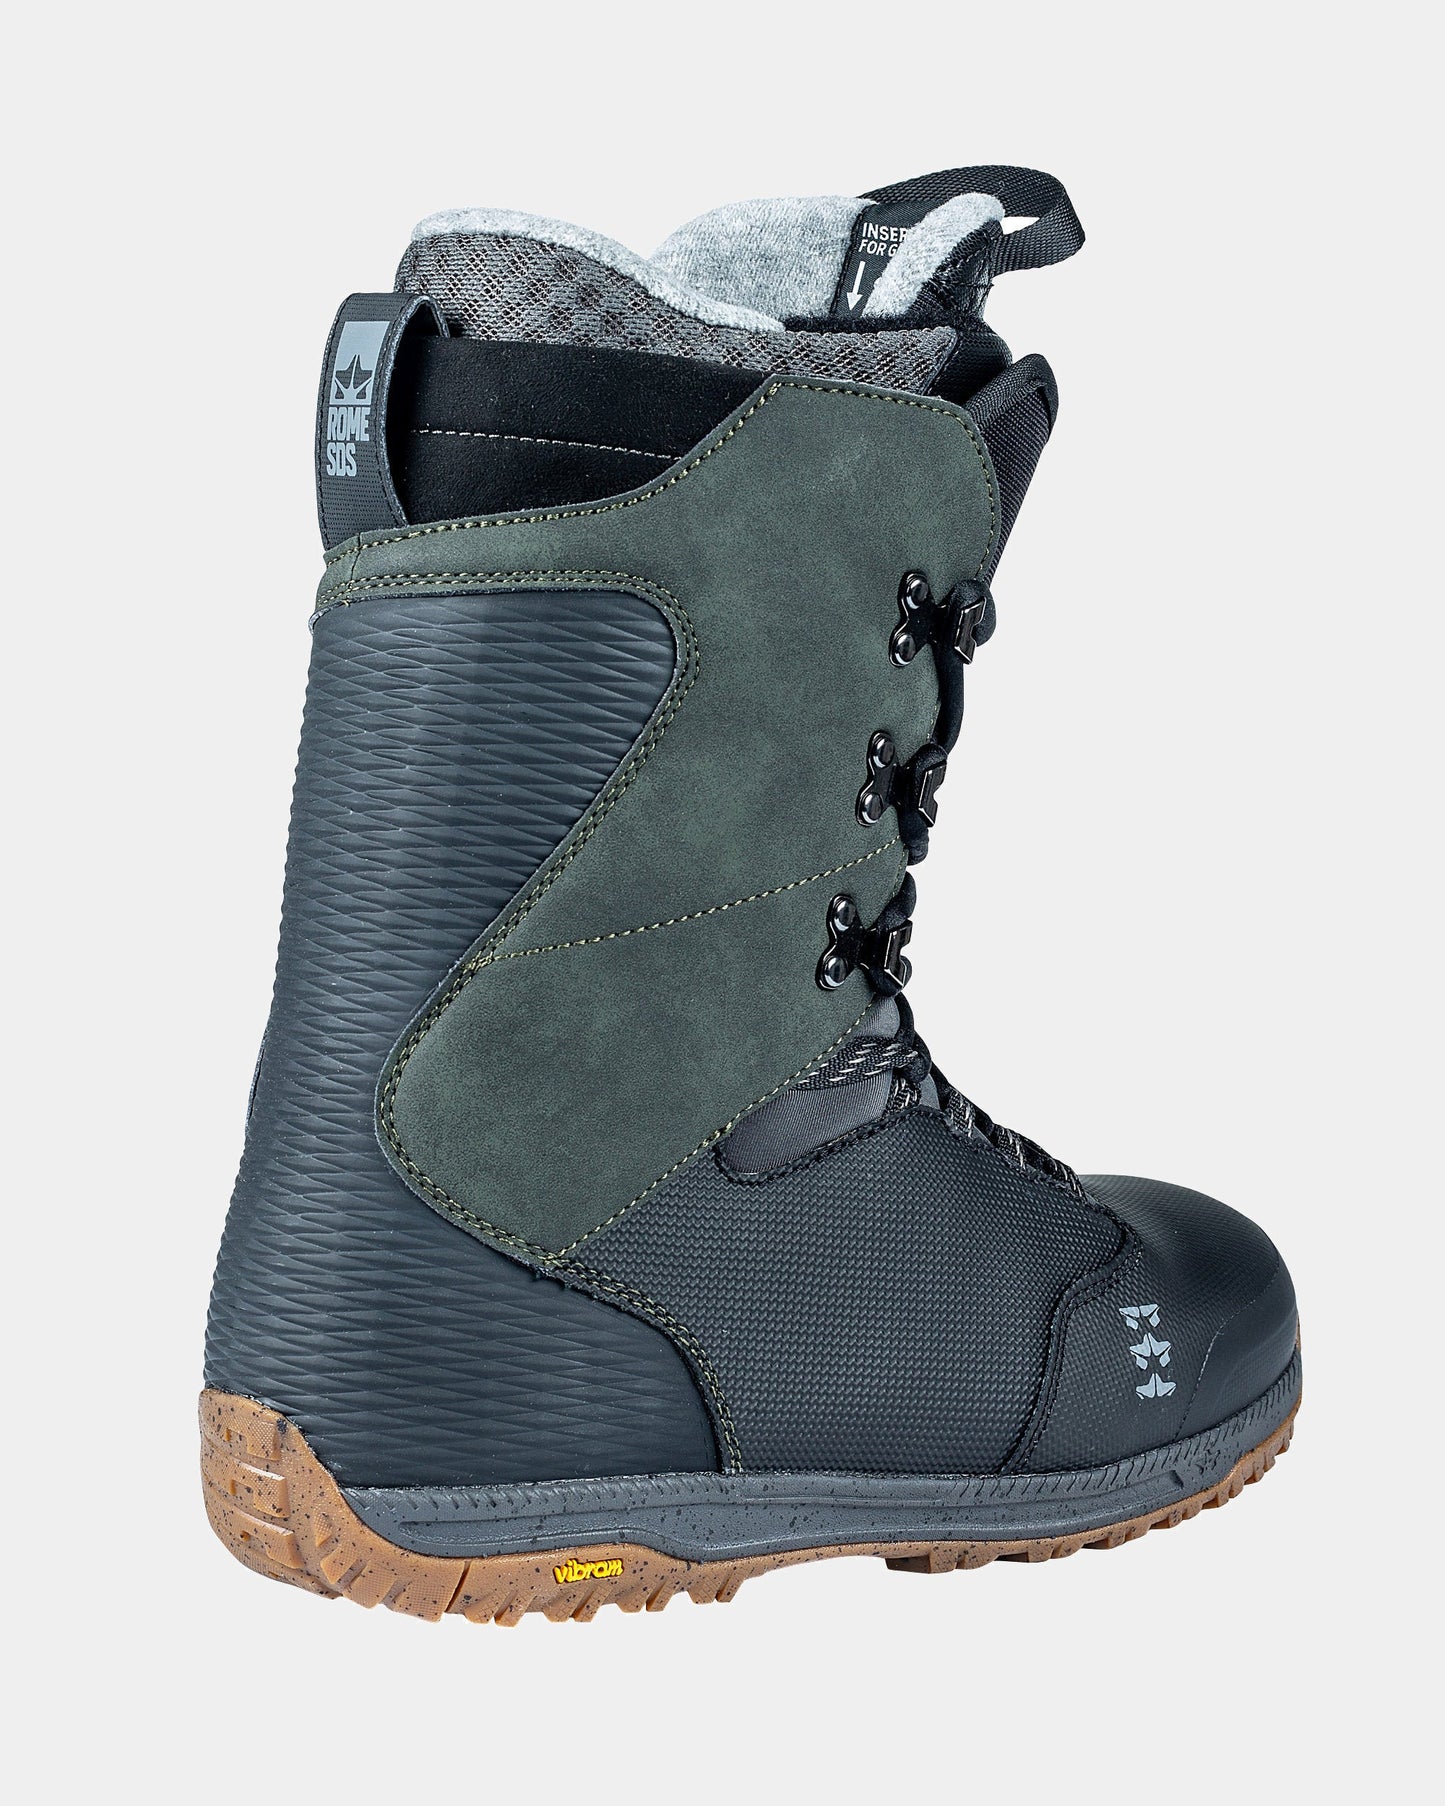 rome libertine lace 2023-2024 men's snowboard boots product image